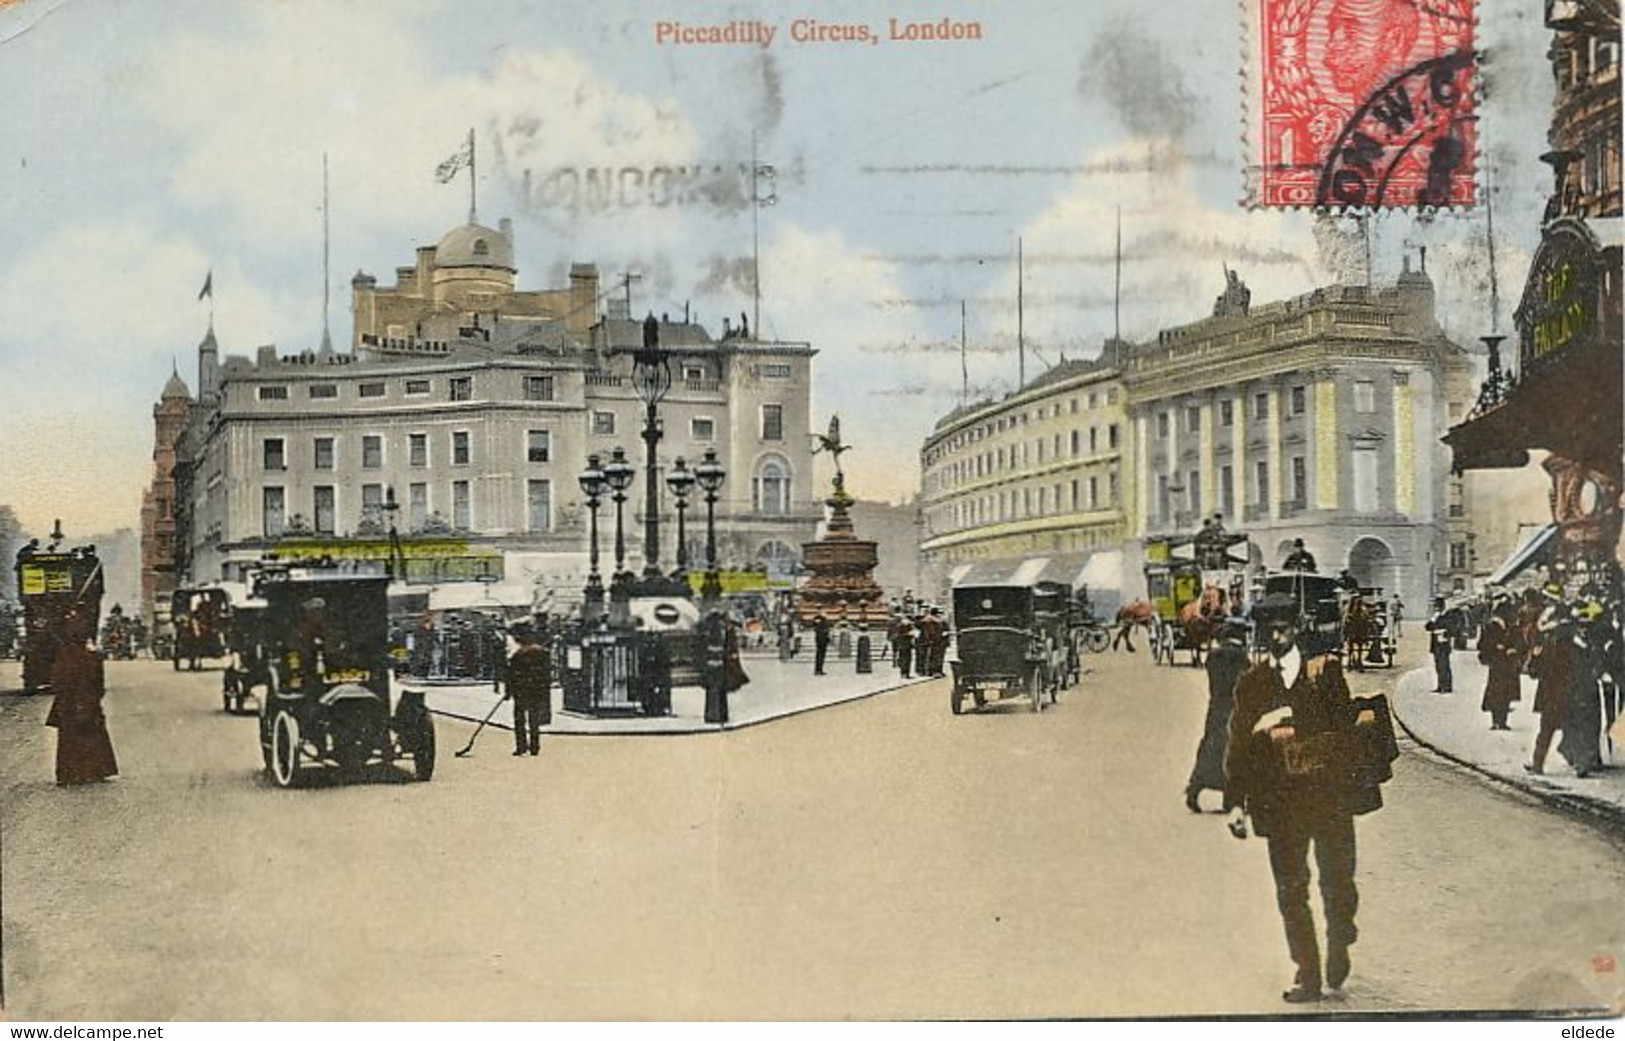 London Picadilly Circus Taxi  Hand Colored - Piccadilly Circus